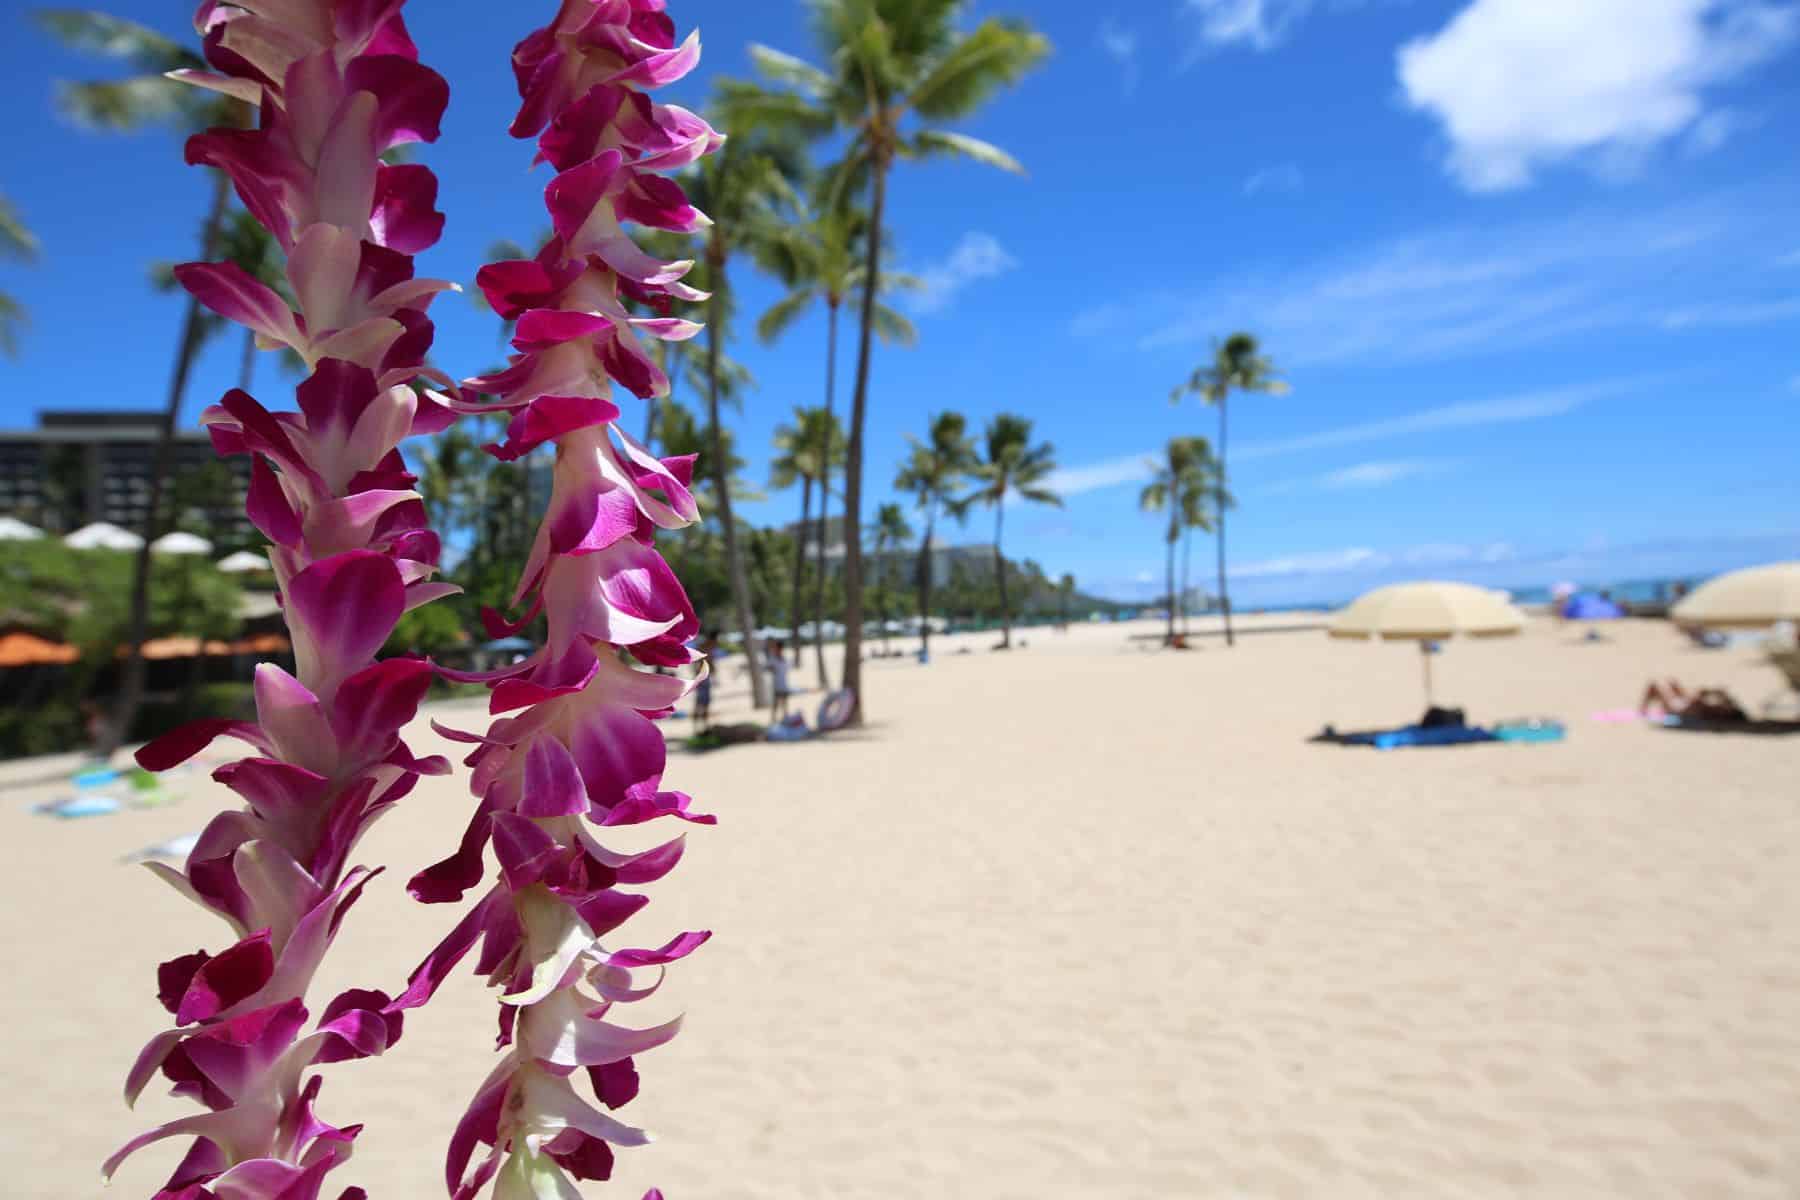 Prepping the environment for Aloha
